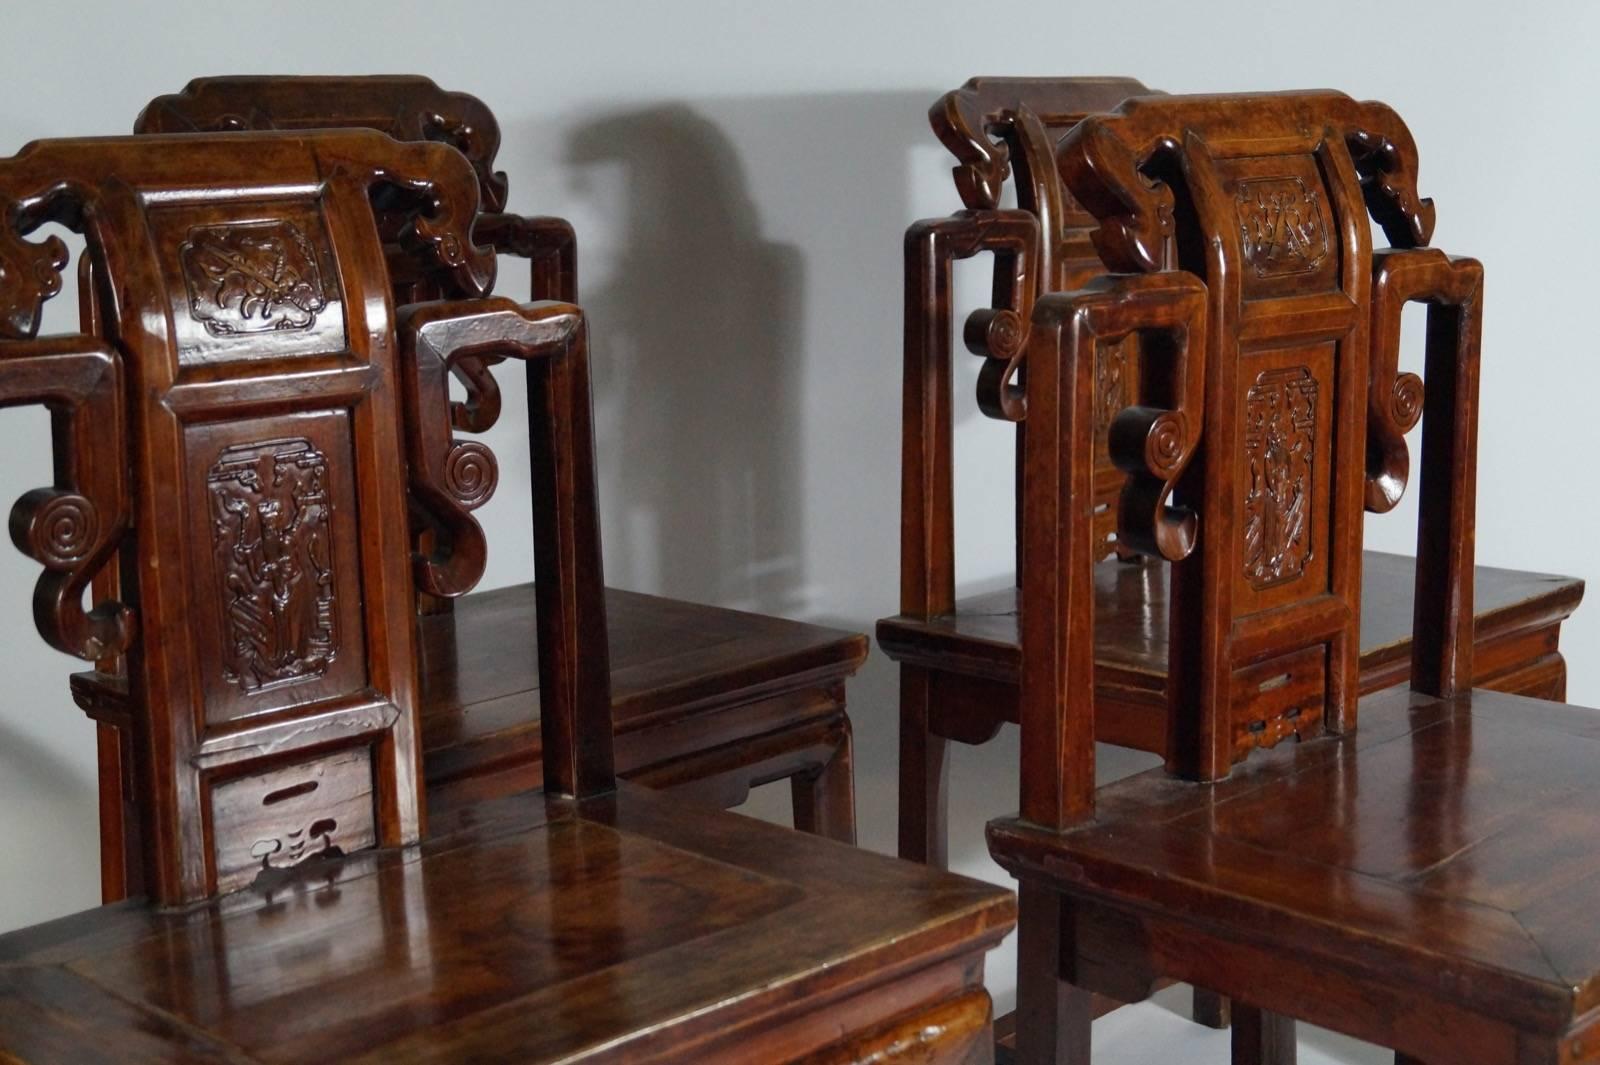 Four Striking Red Chinese Carved Wood Chairs, 1860s In Good Condition For Sale In Haarlem, Noord-Holland